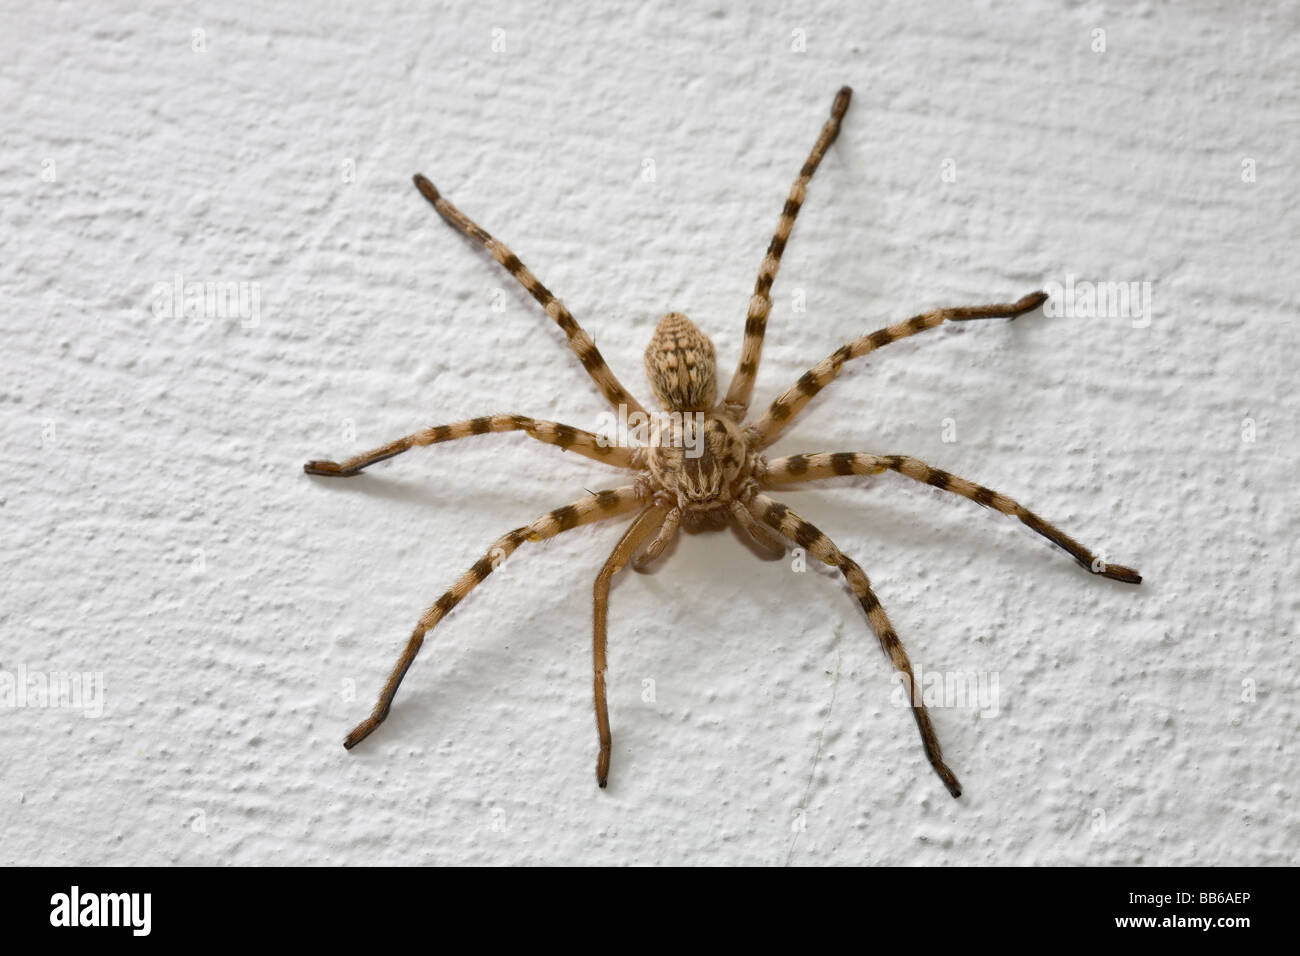 Nursery Web Spider of Pisauridae family on wall in Greece Stock Photo